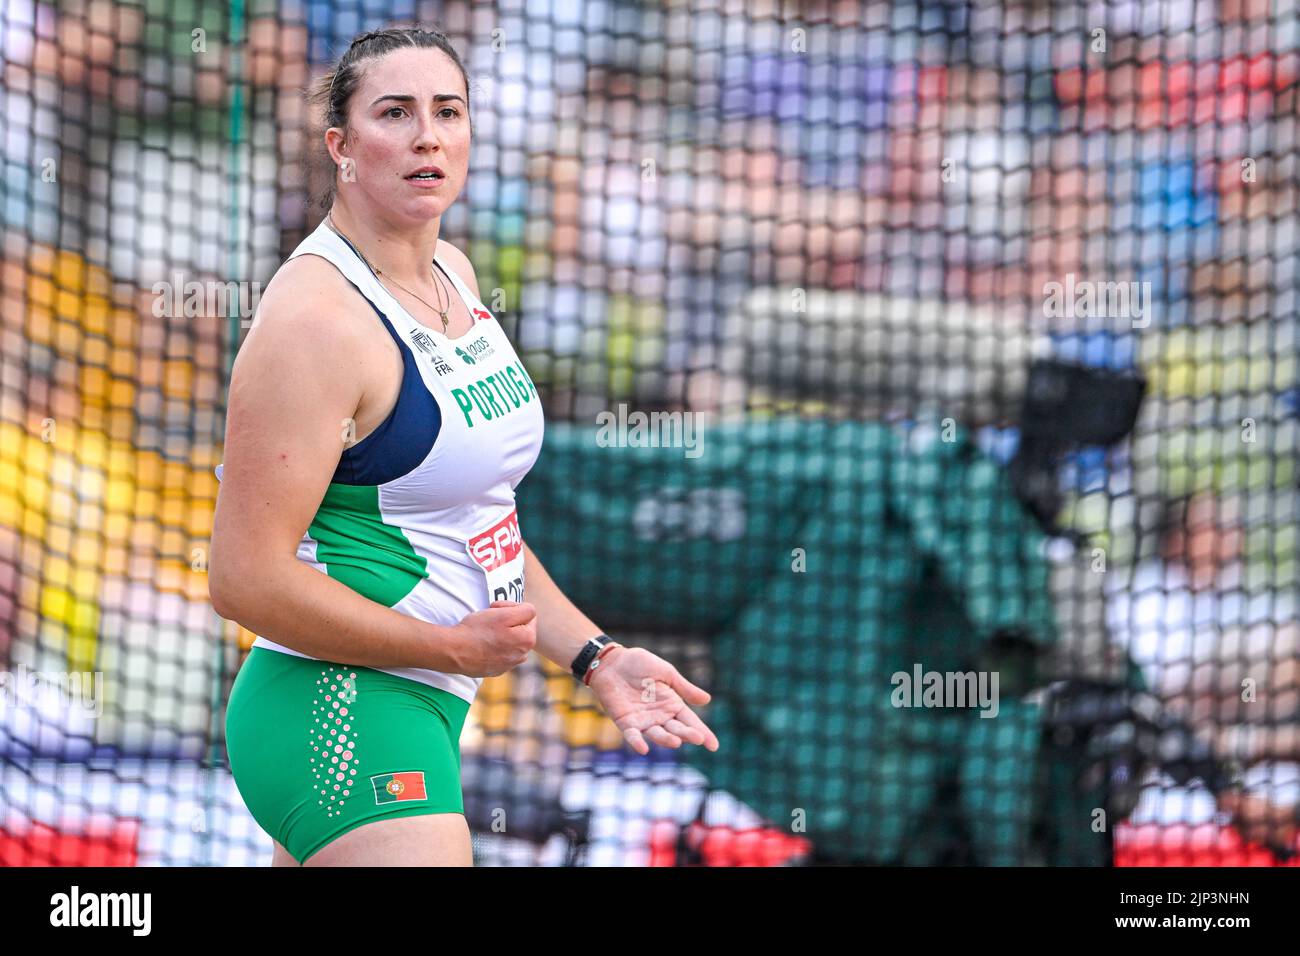 MUNCHEN, GERMANY - AUGUST 15: Irina Rodrigues of Portugal competing in Women's Discus Throw at the European Championships Munich 2022 at the Olympiastadion on August 15, 2022 in Munchen, Germany (Photo by Andy Astfalck/BSR Agency) Stock Photo